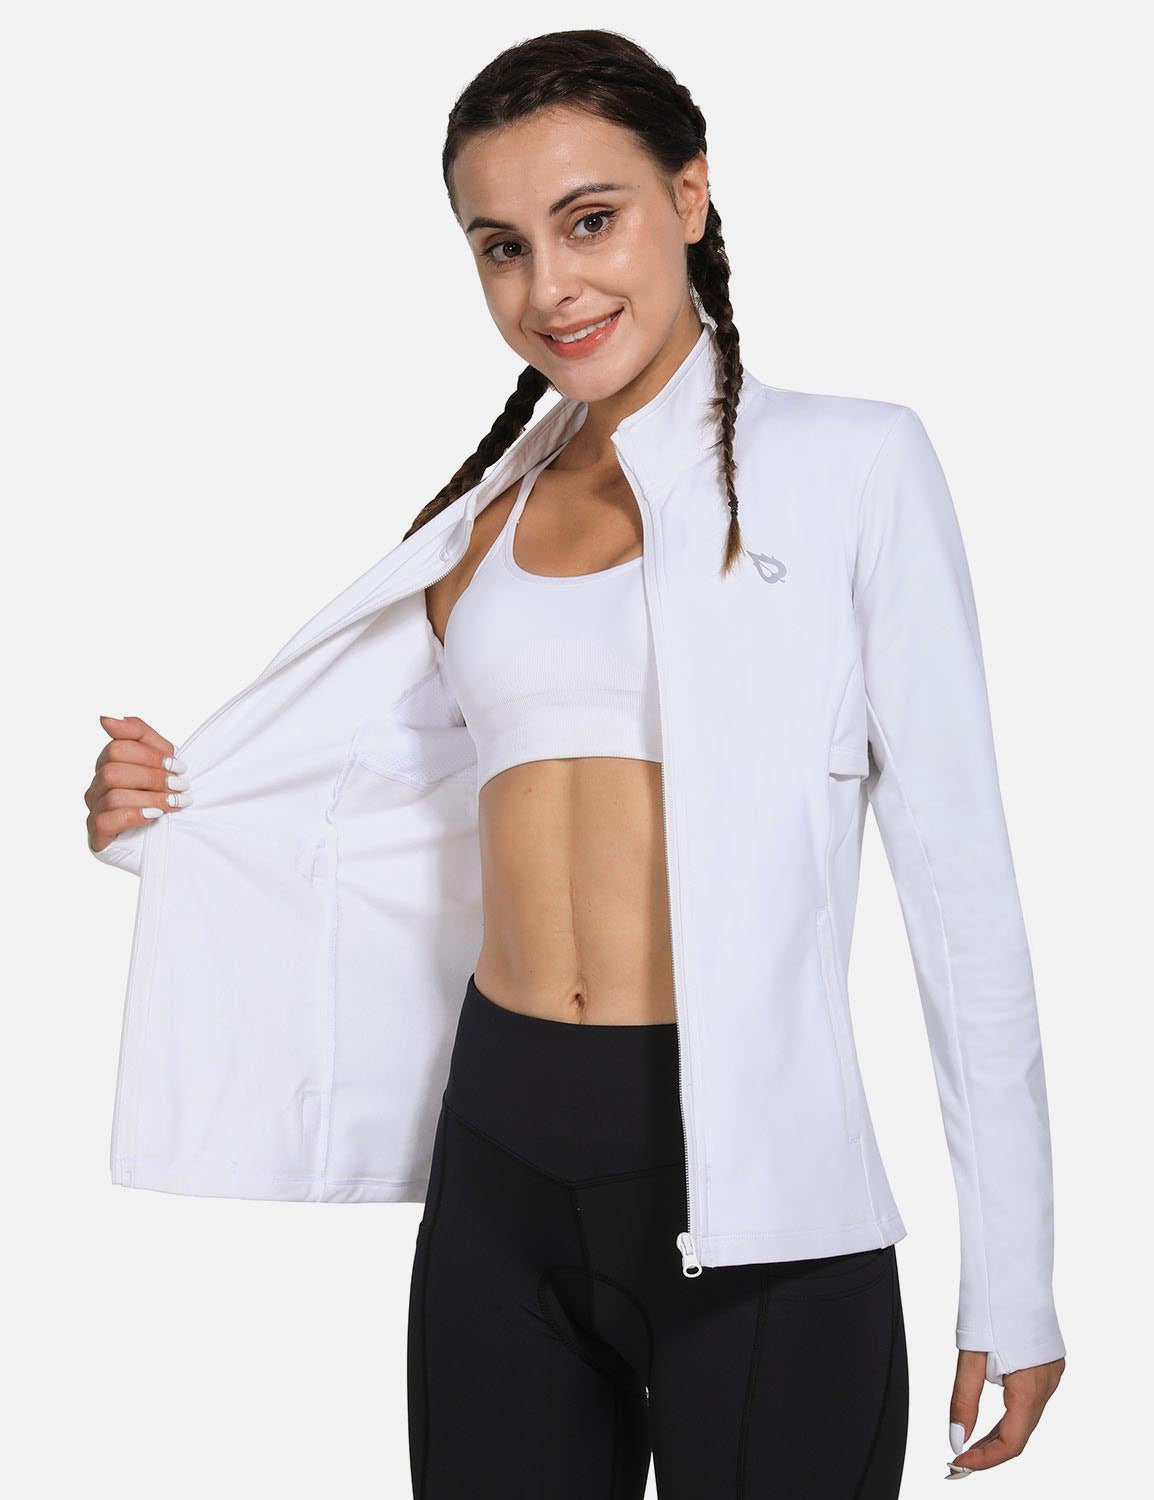 Baleaf Women's Laureate Thermal Water-Resistant Jacket cai039 Lucent White Side